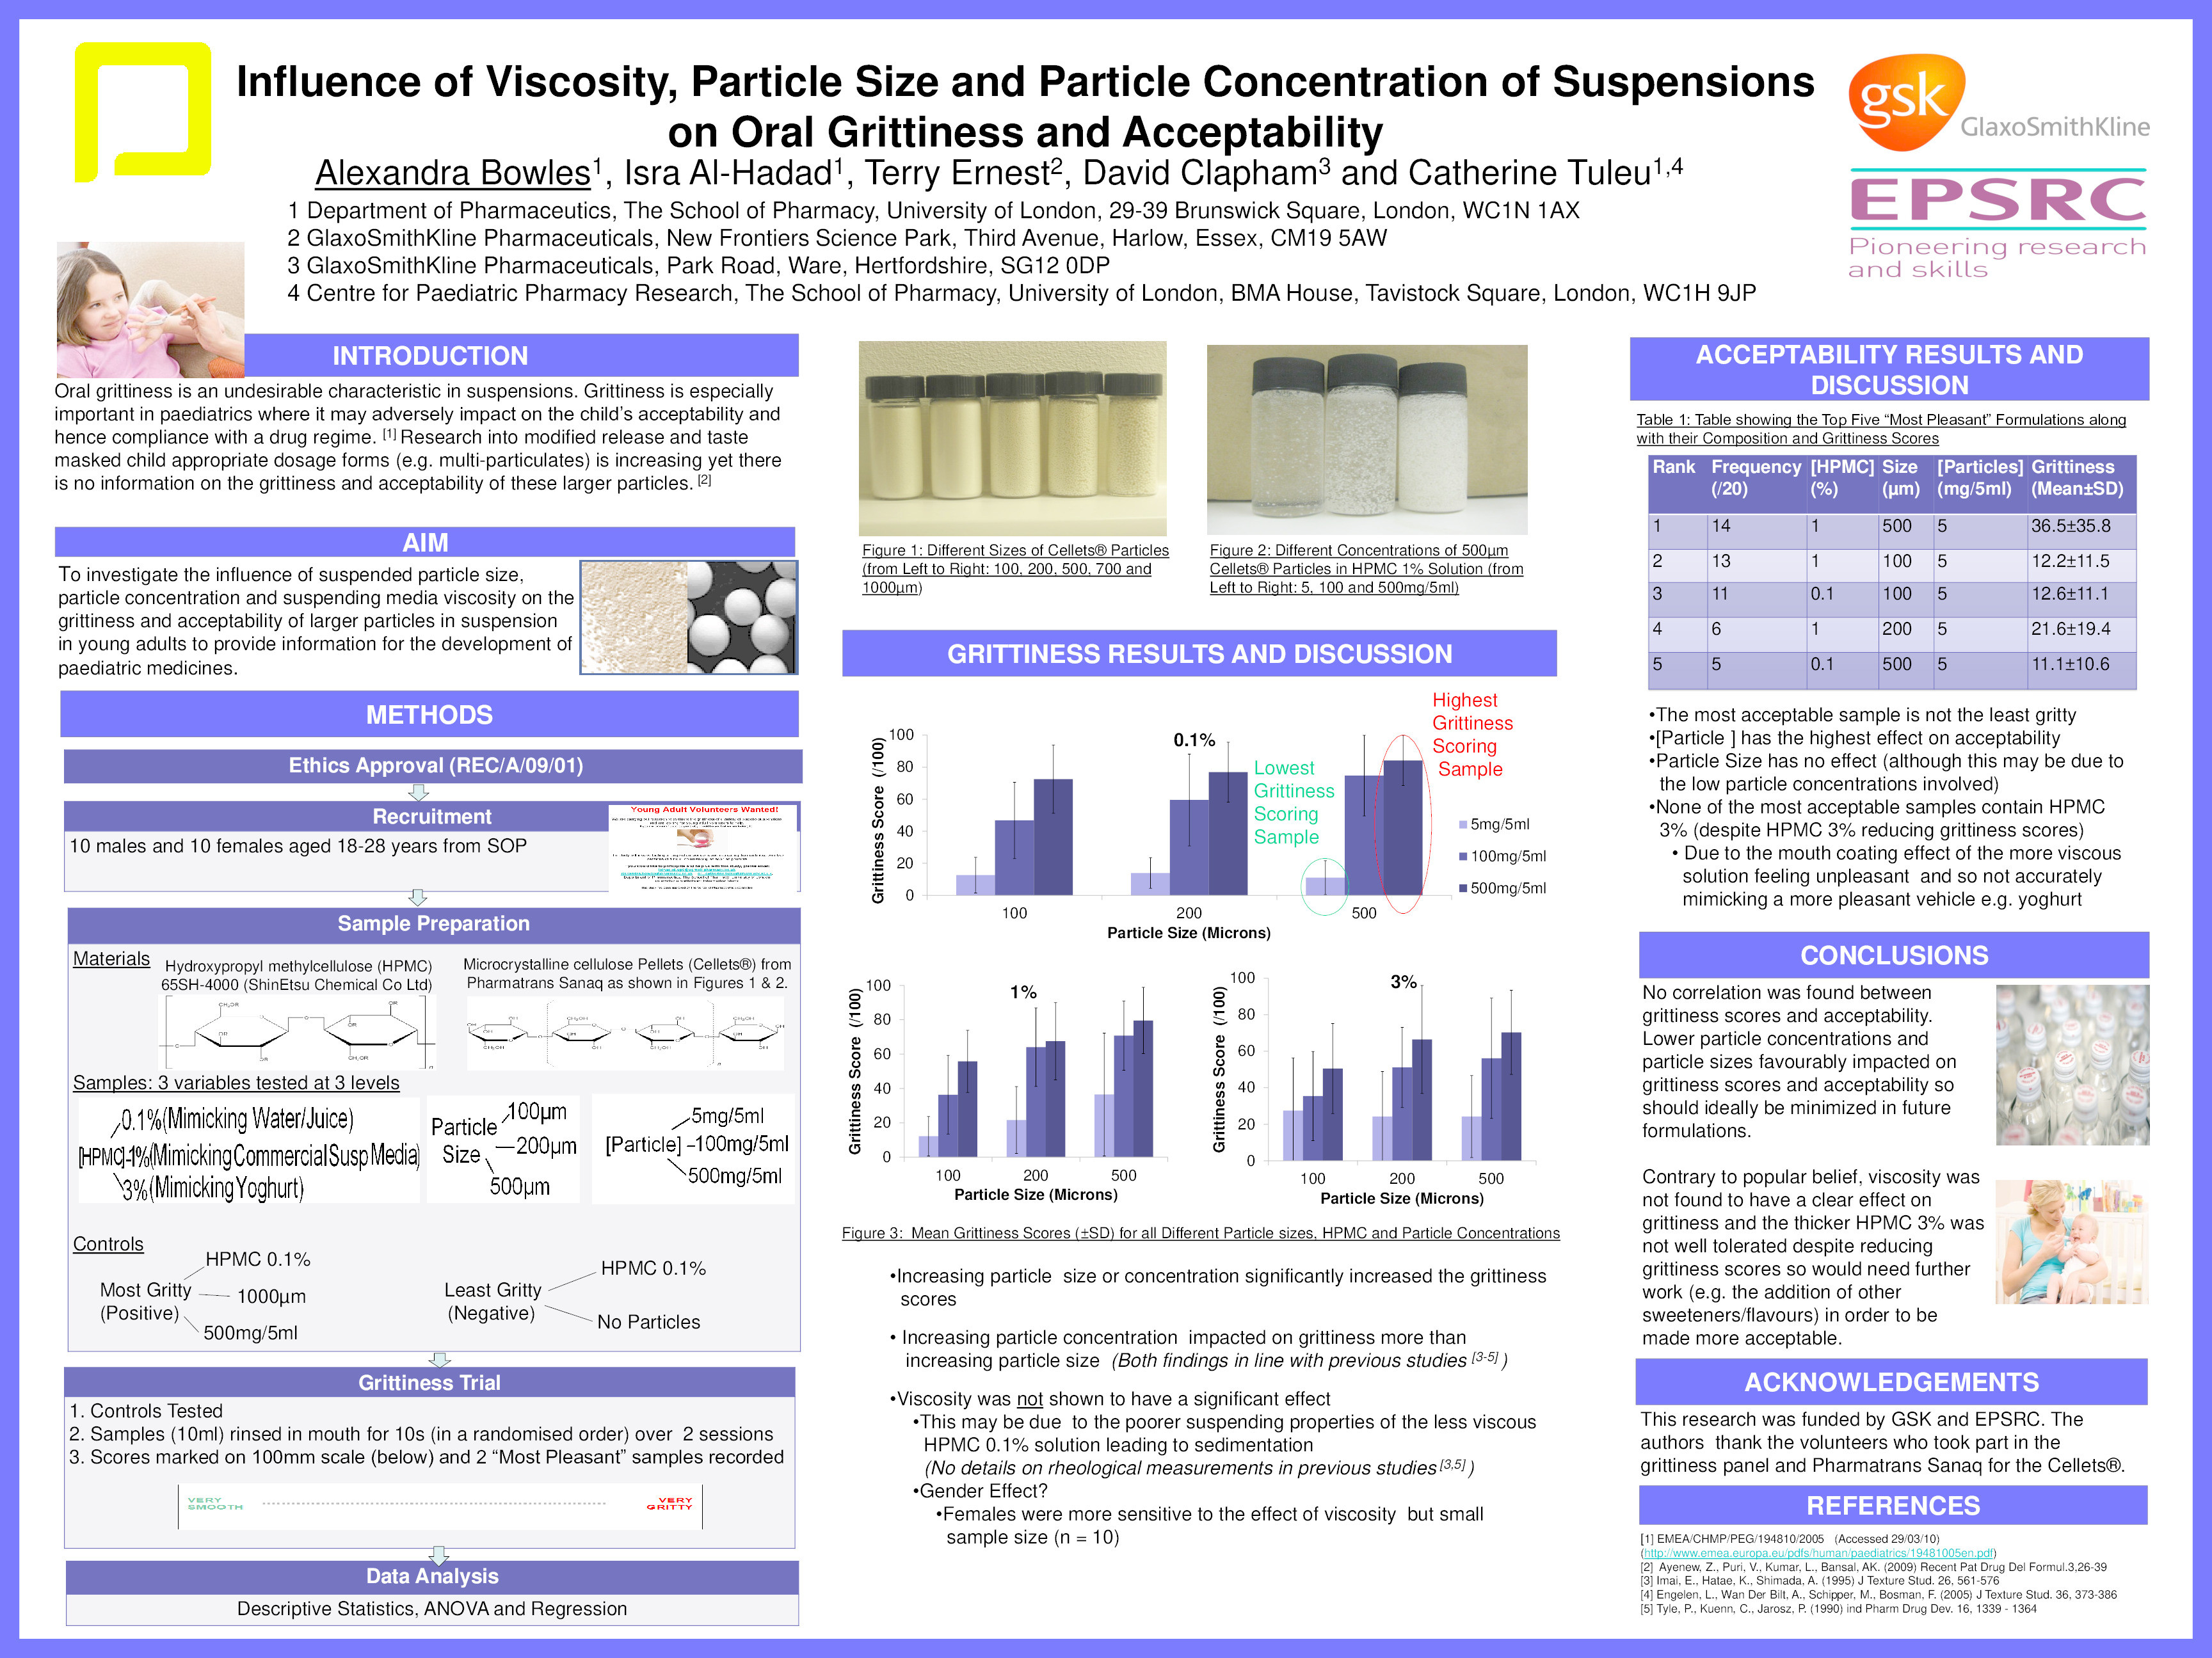 Influence of viscosity, particle size and particle concentration of suspensions on oral grittiness and acceptability in young adults Thumbnail